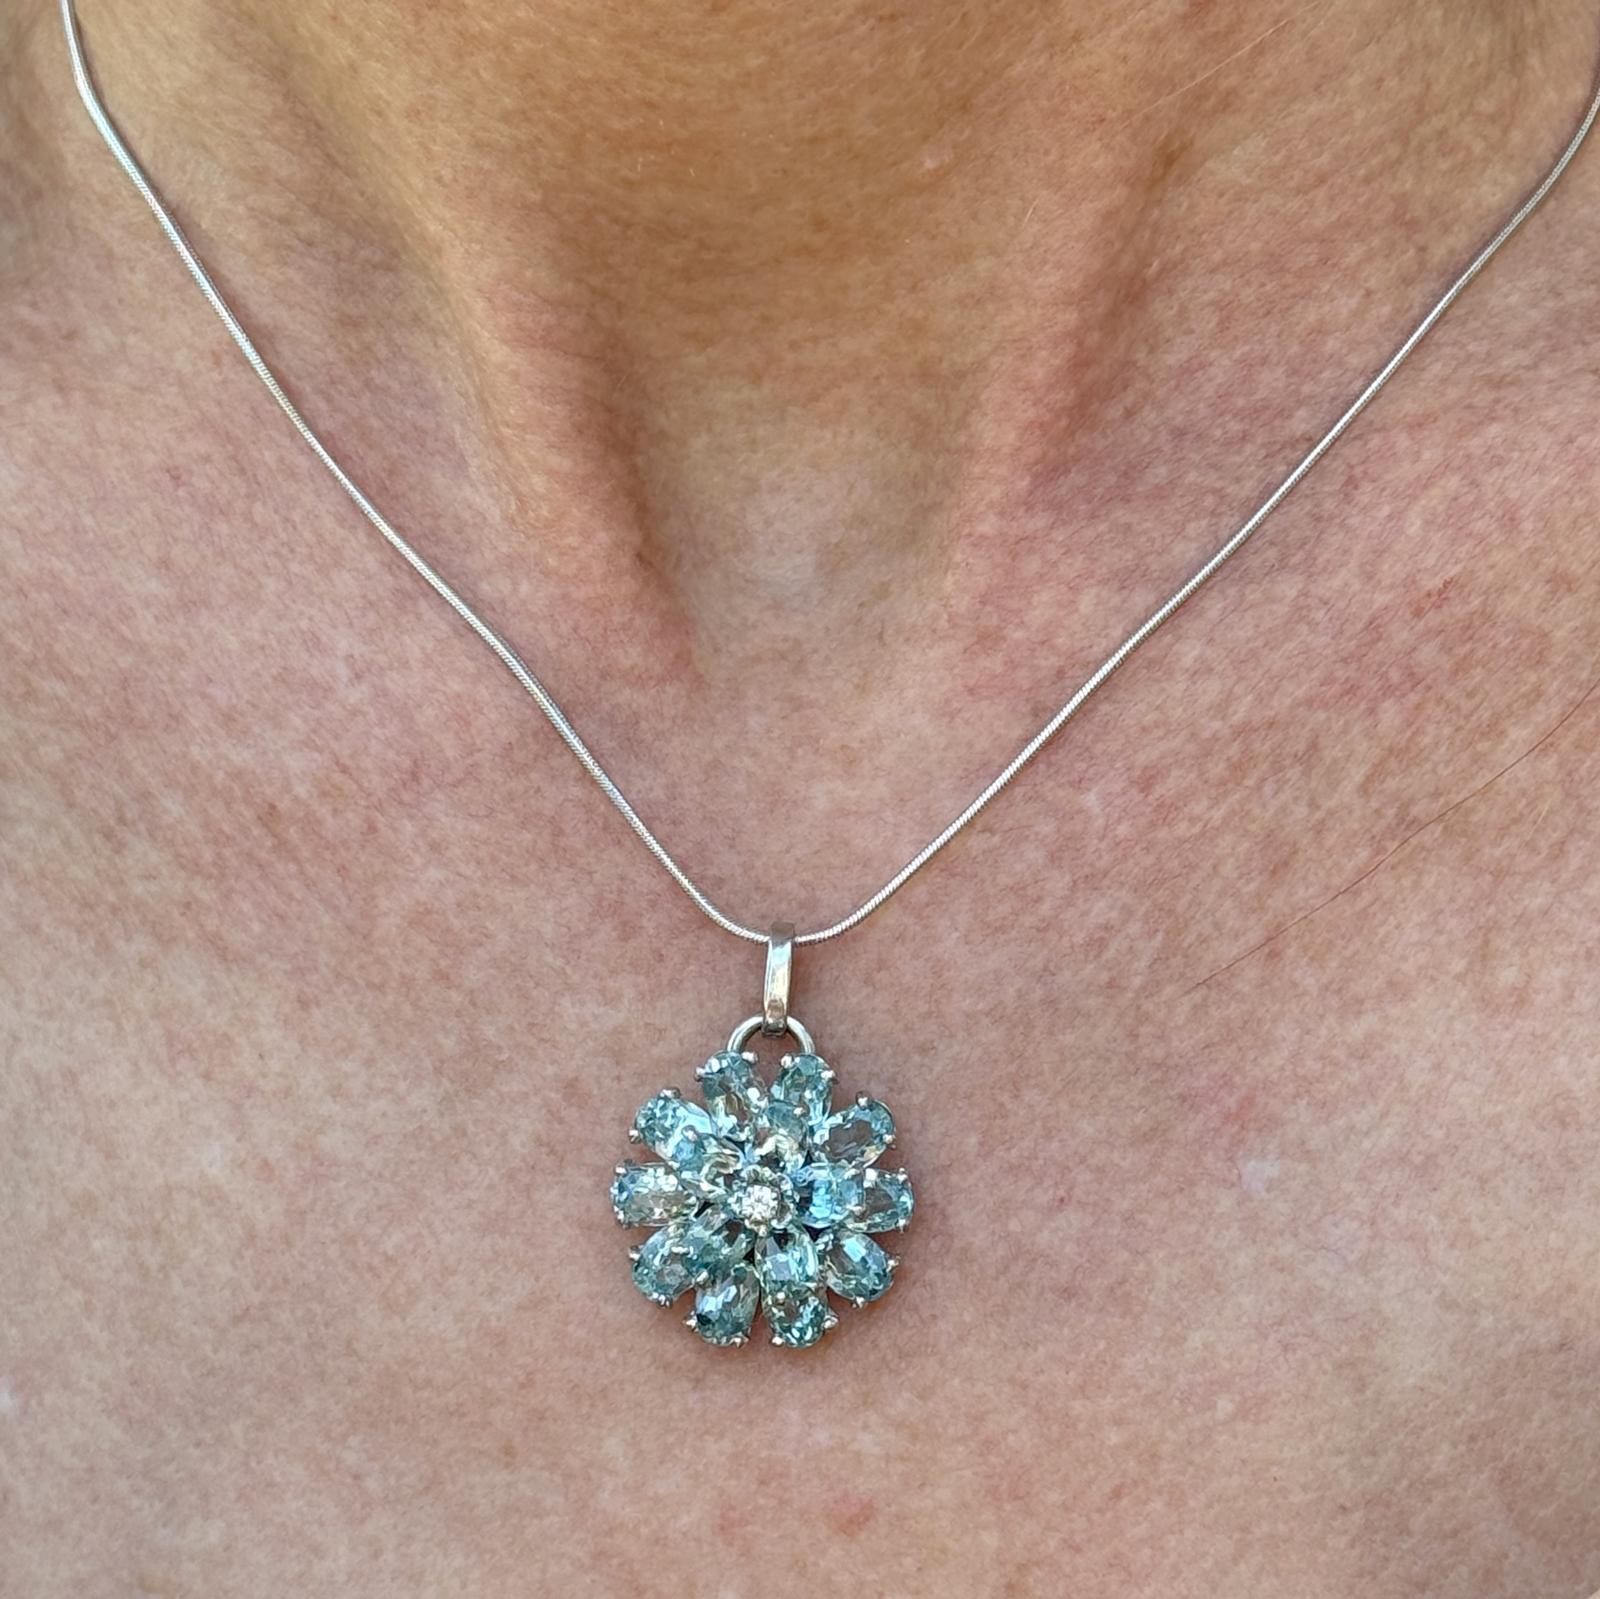 This aquamarine diamond pendant features oval-cut aquamarine gemstones as its centerpiece, known for their serene blue-green hue reminiscent of the ocean. The 16 oval aquamarine gemstones weigh approximately 8.00 carat total weight and are set in a